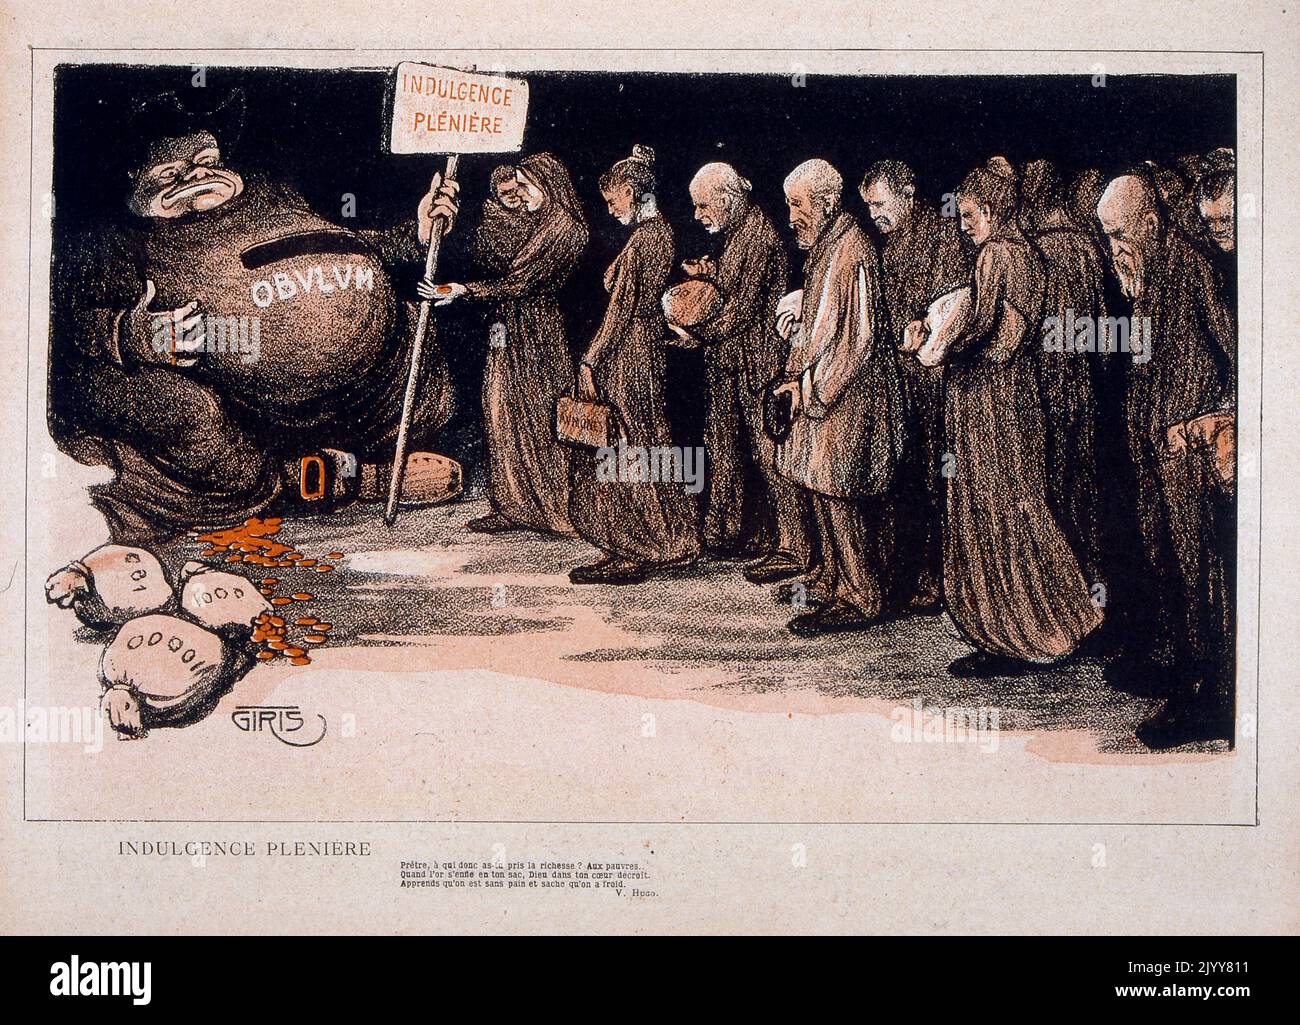 In L'Assiette au Beurre satirical magazine; Coloured Illustration of a fat priest with a stomach resembling a piggy bank. The poor line up to put money in the slot. Entitled: Plenary Indulgences: a quote from Victor Hugo. Stock Photo